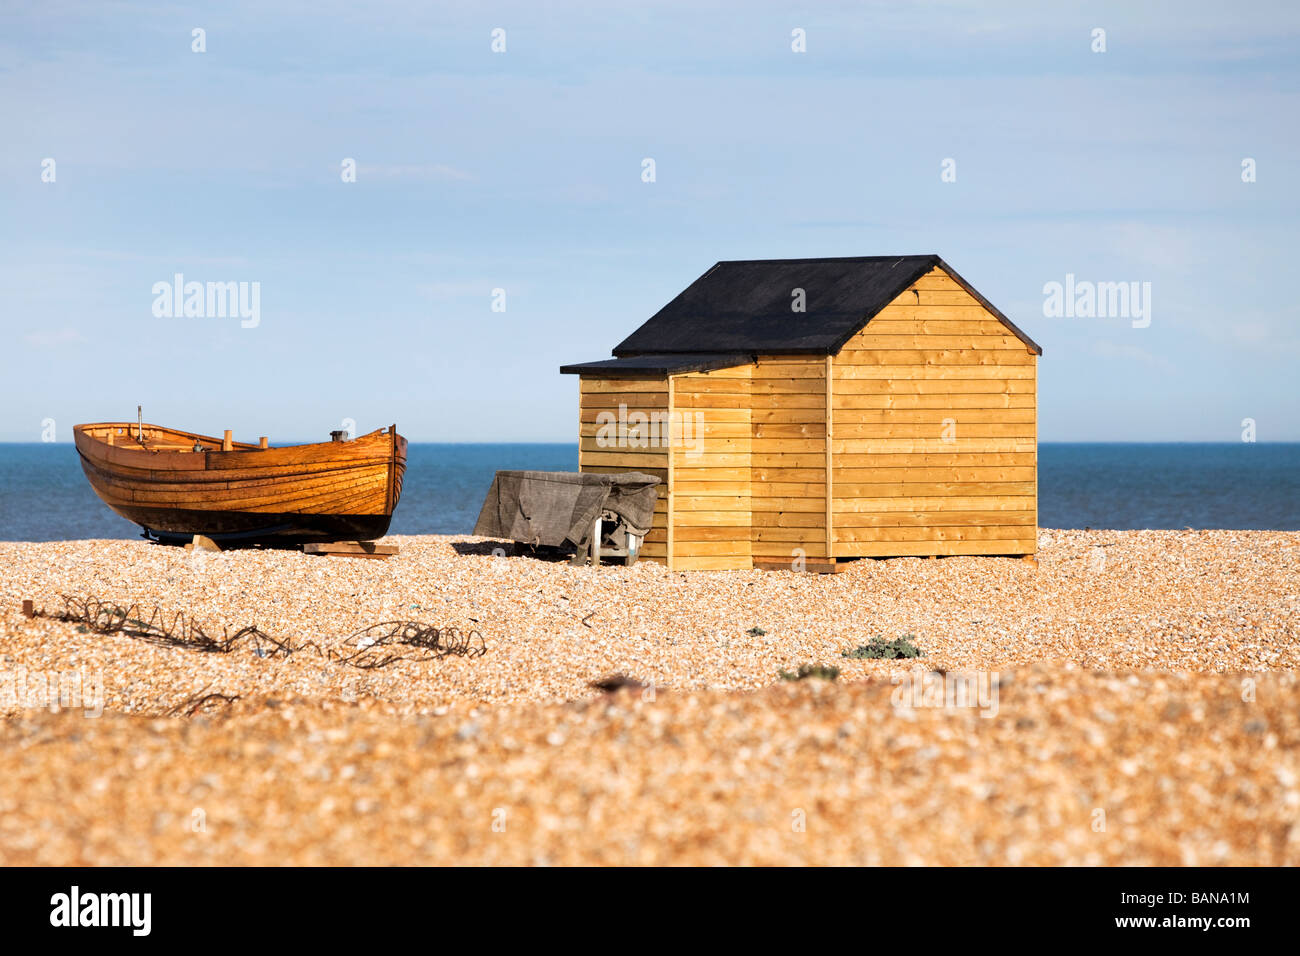 Traditional clinker built fishing boat and beach hut on England's South East, Channel coast Stock Photo